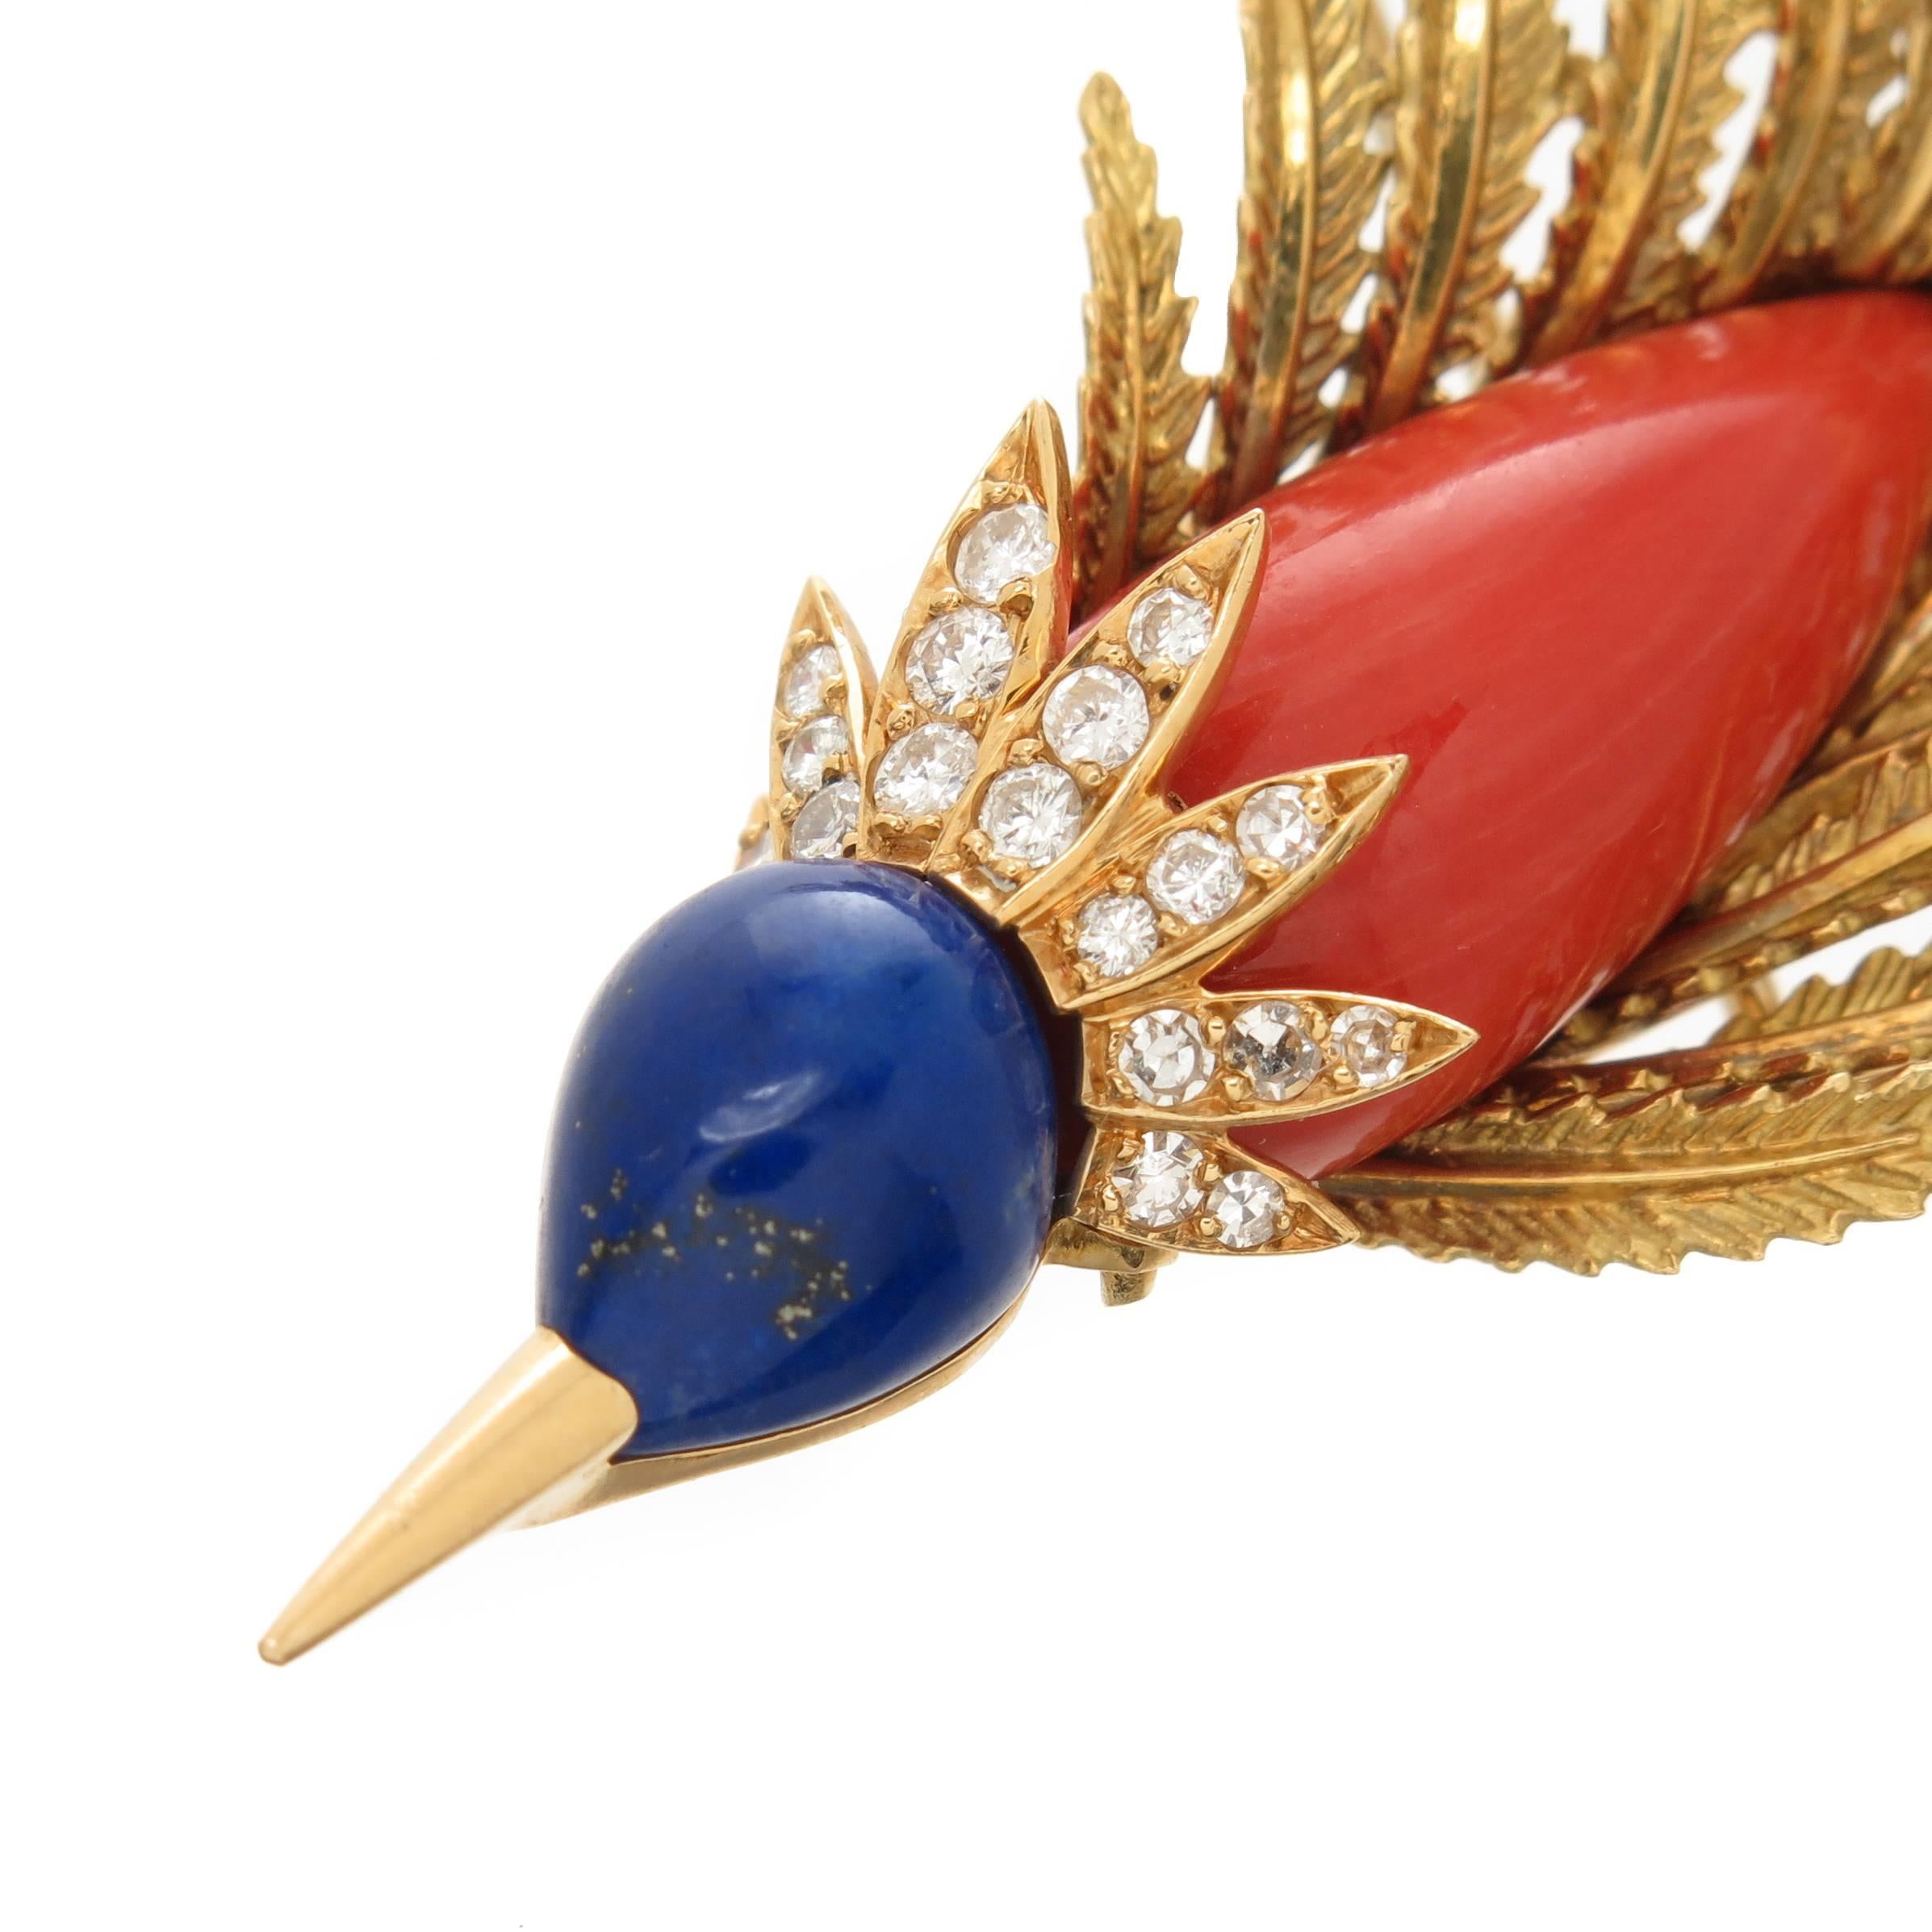 Circa 1960s Cartier Paris 18K yellow Gold Bird Clip Brooch. Measuring 3 3/4 inch in length. Centrally set with a fine color Coral for the Body, Lapis Lazuli for the Head and further set with numerous Diamonds.Hand made with nice texturing work for